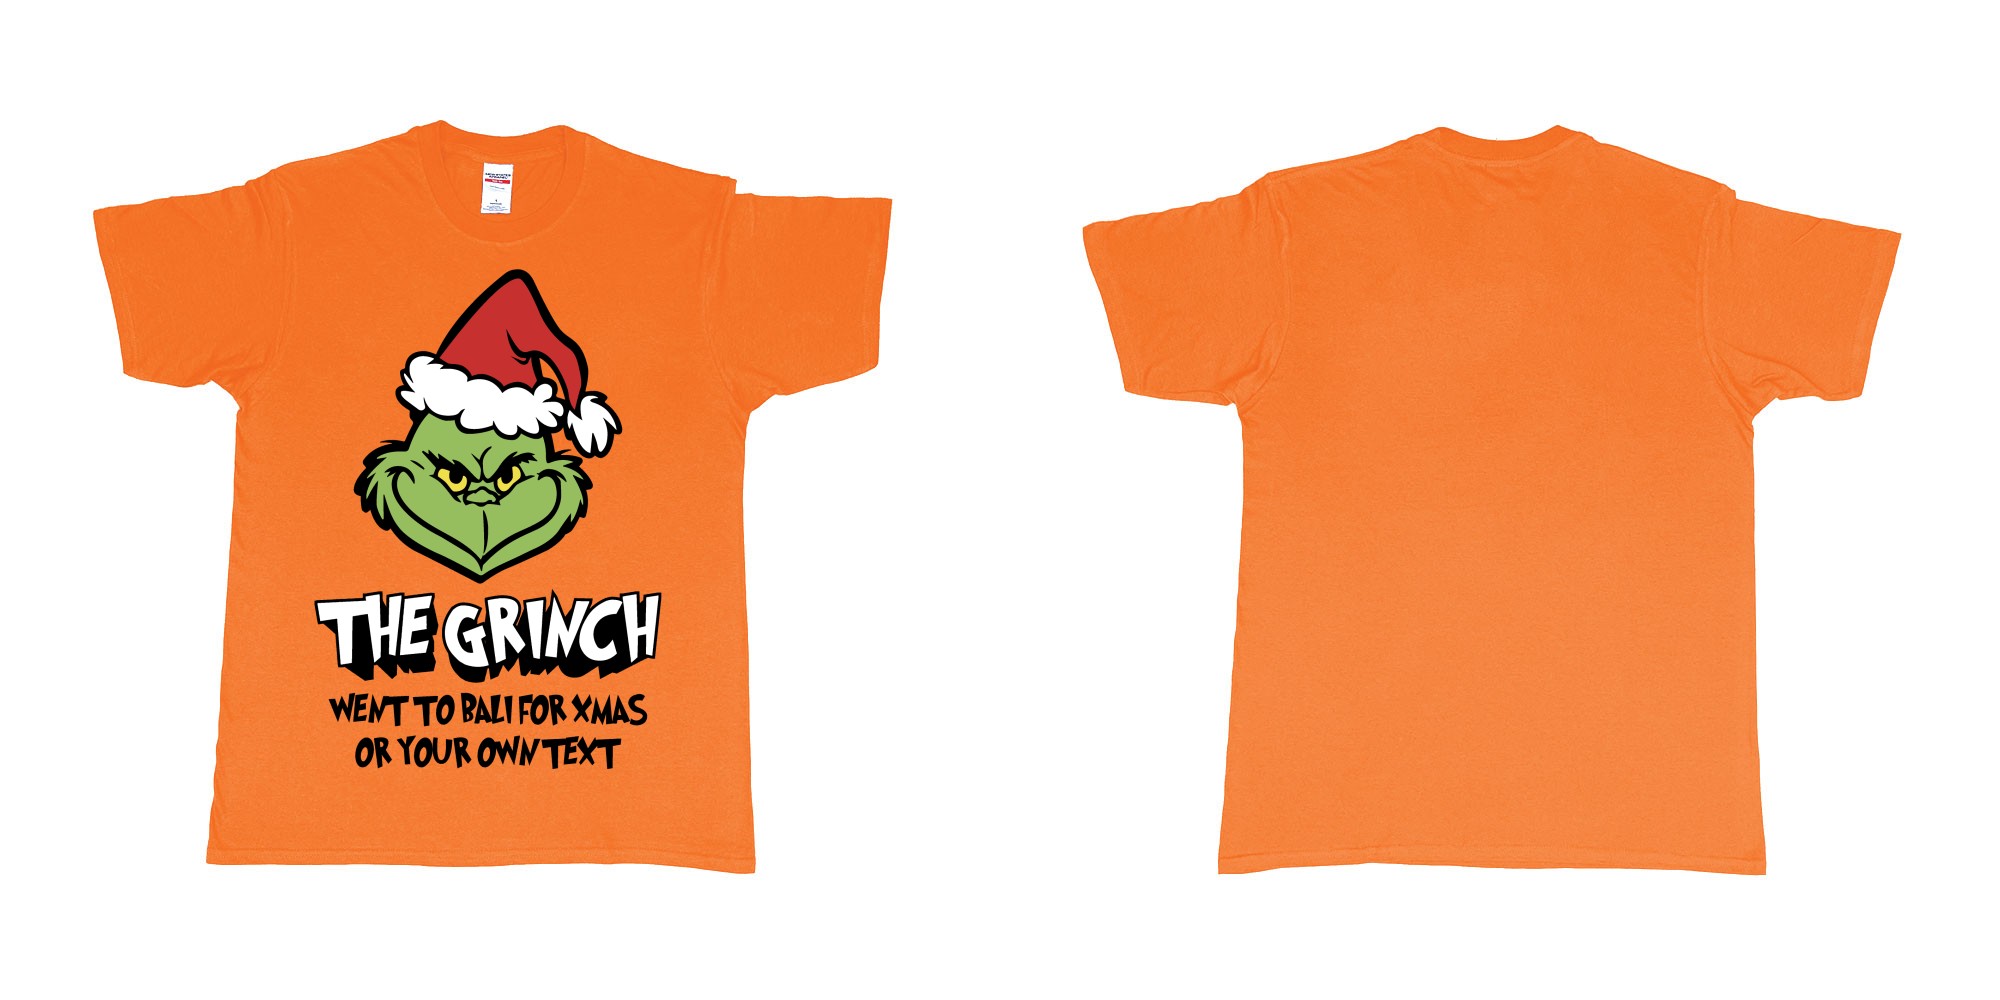 Custom tshirt design the grinch went to bali for xmas tshirt in fabric color orange choice your own text made in Bali by The Pirate Way